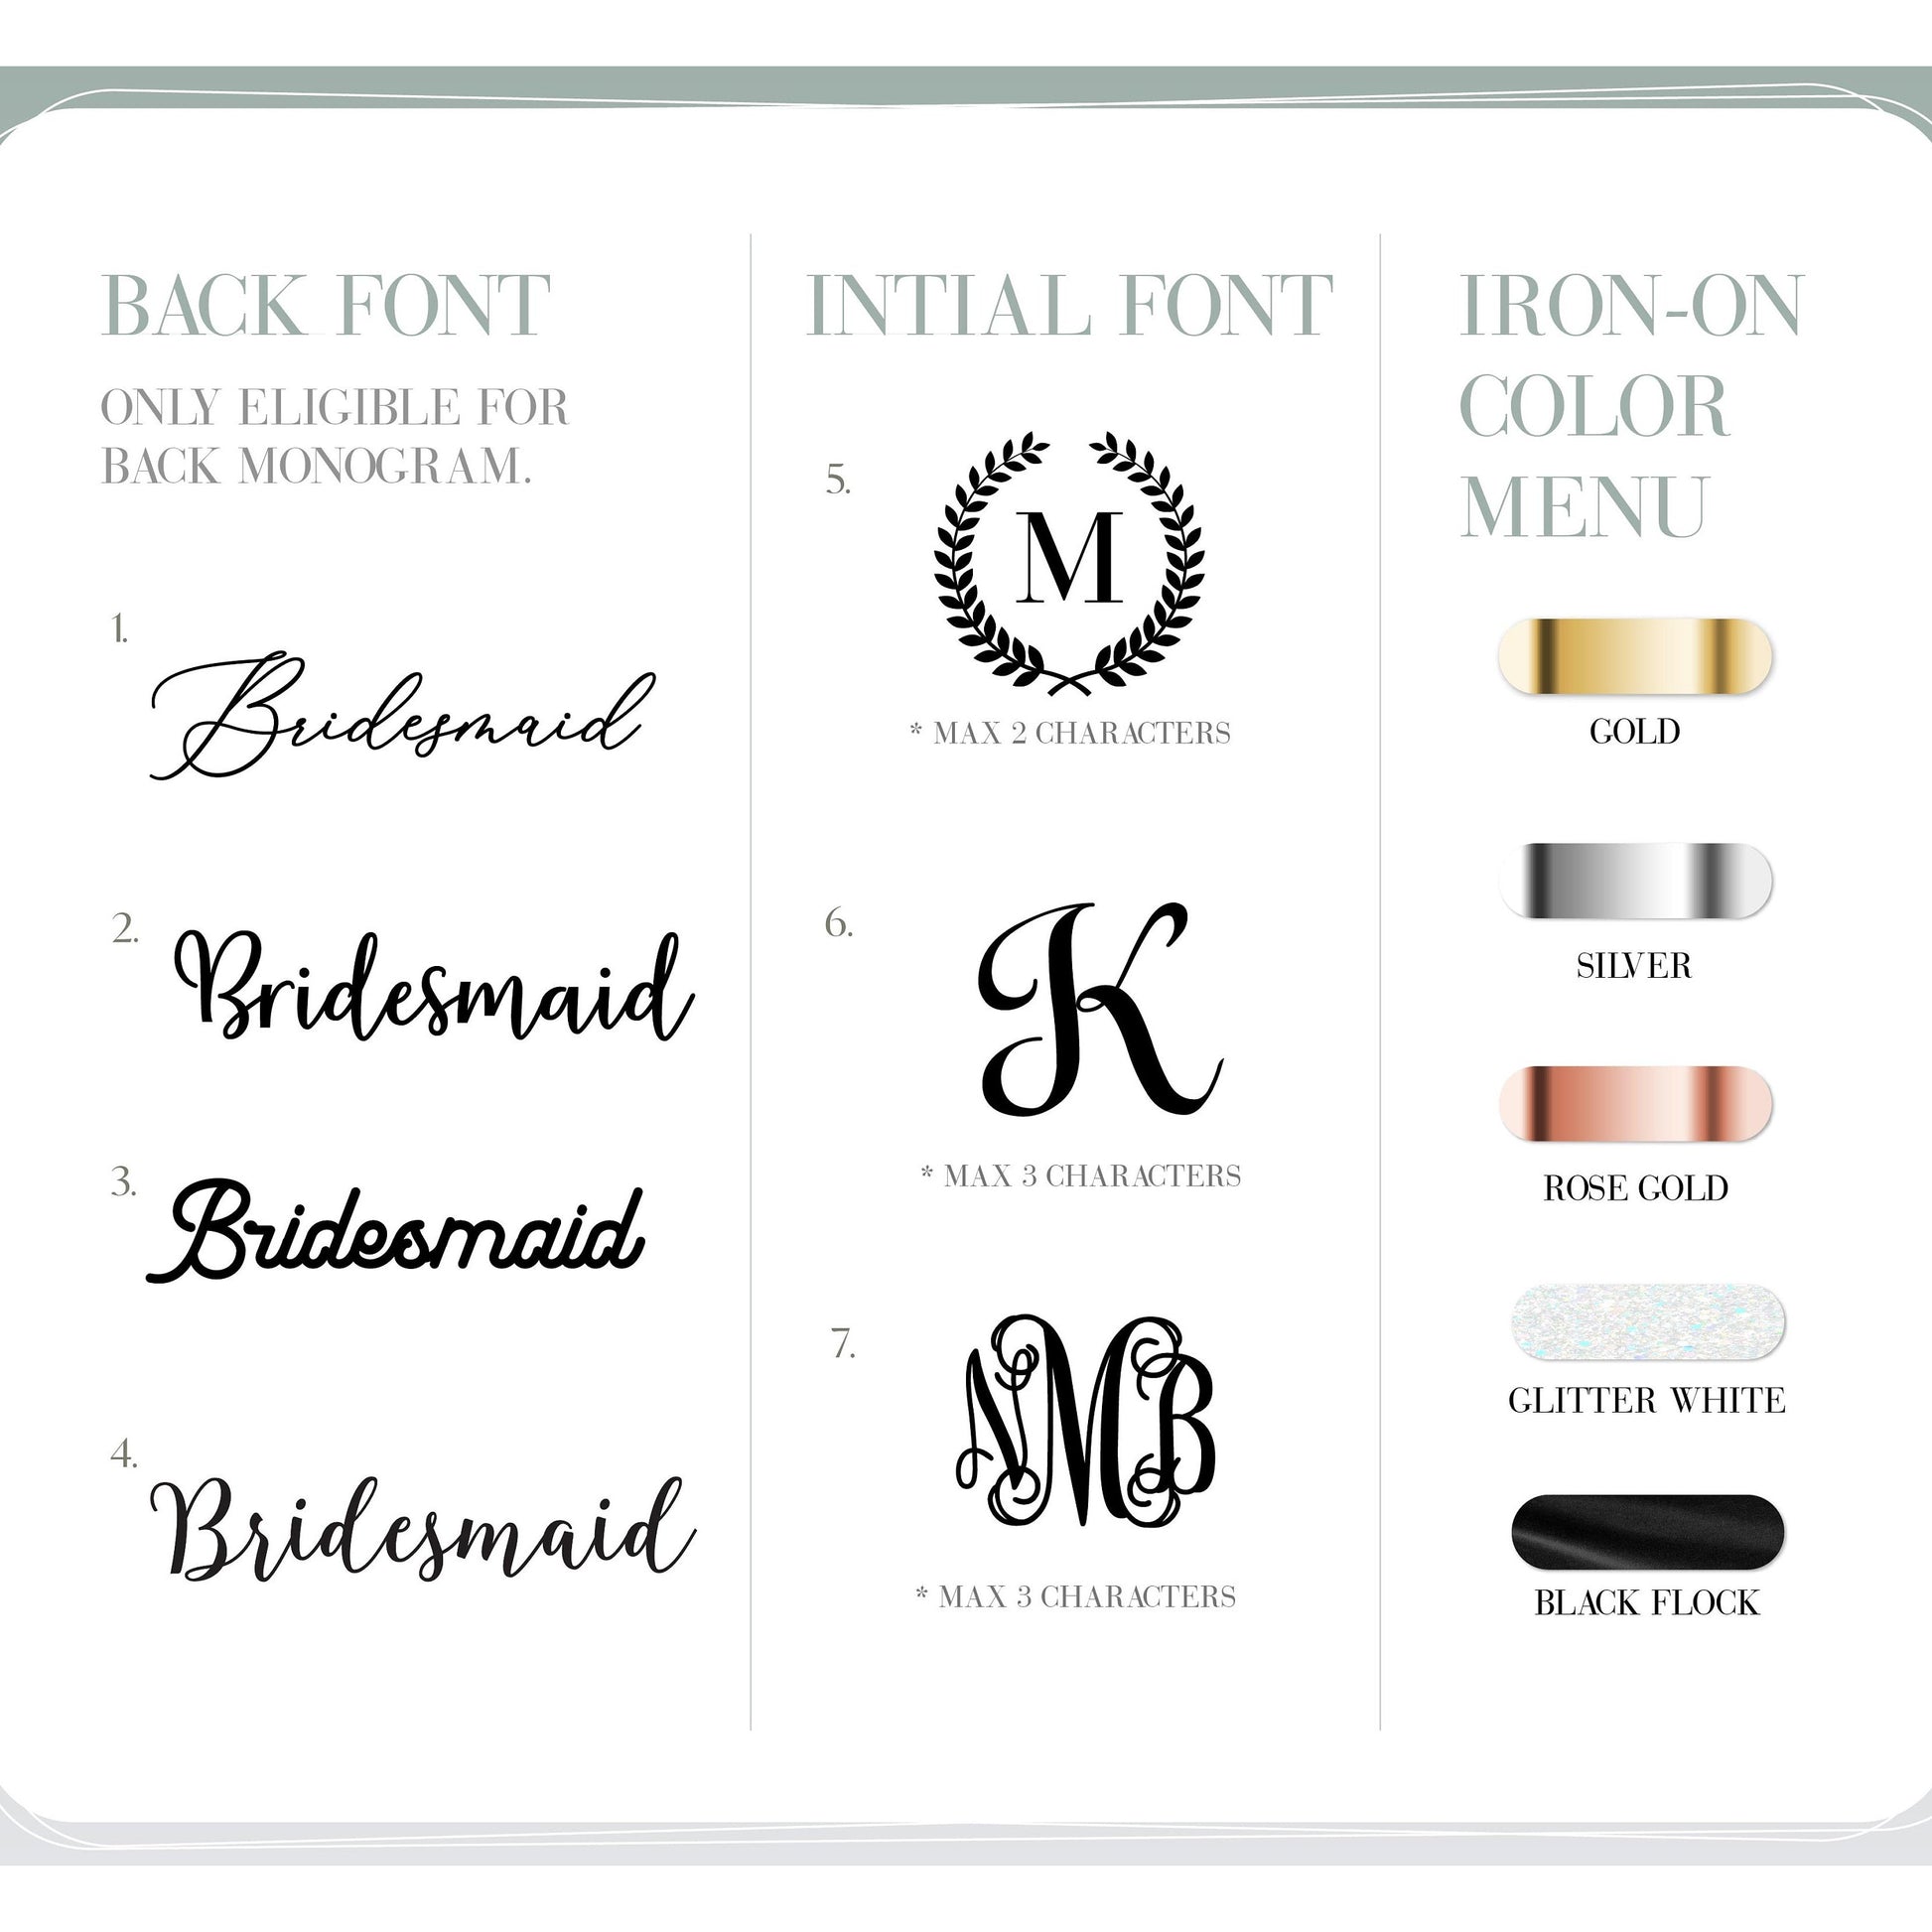 Custom Bridal Robes design chart showcasing back fonts, initial fonts, and various iron-on color options.